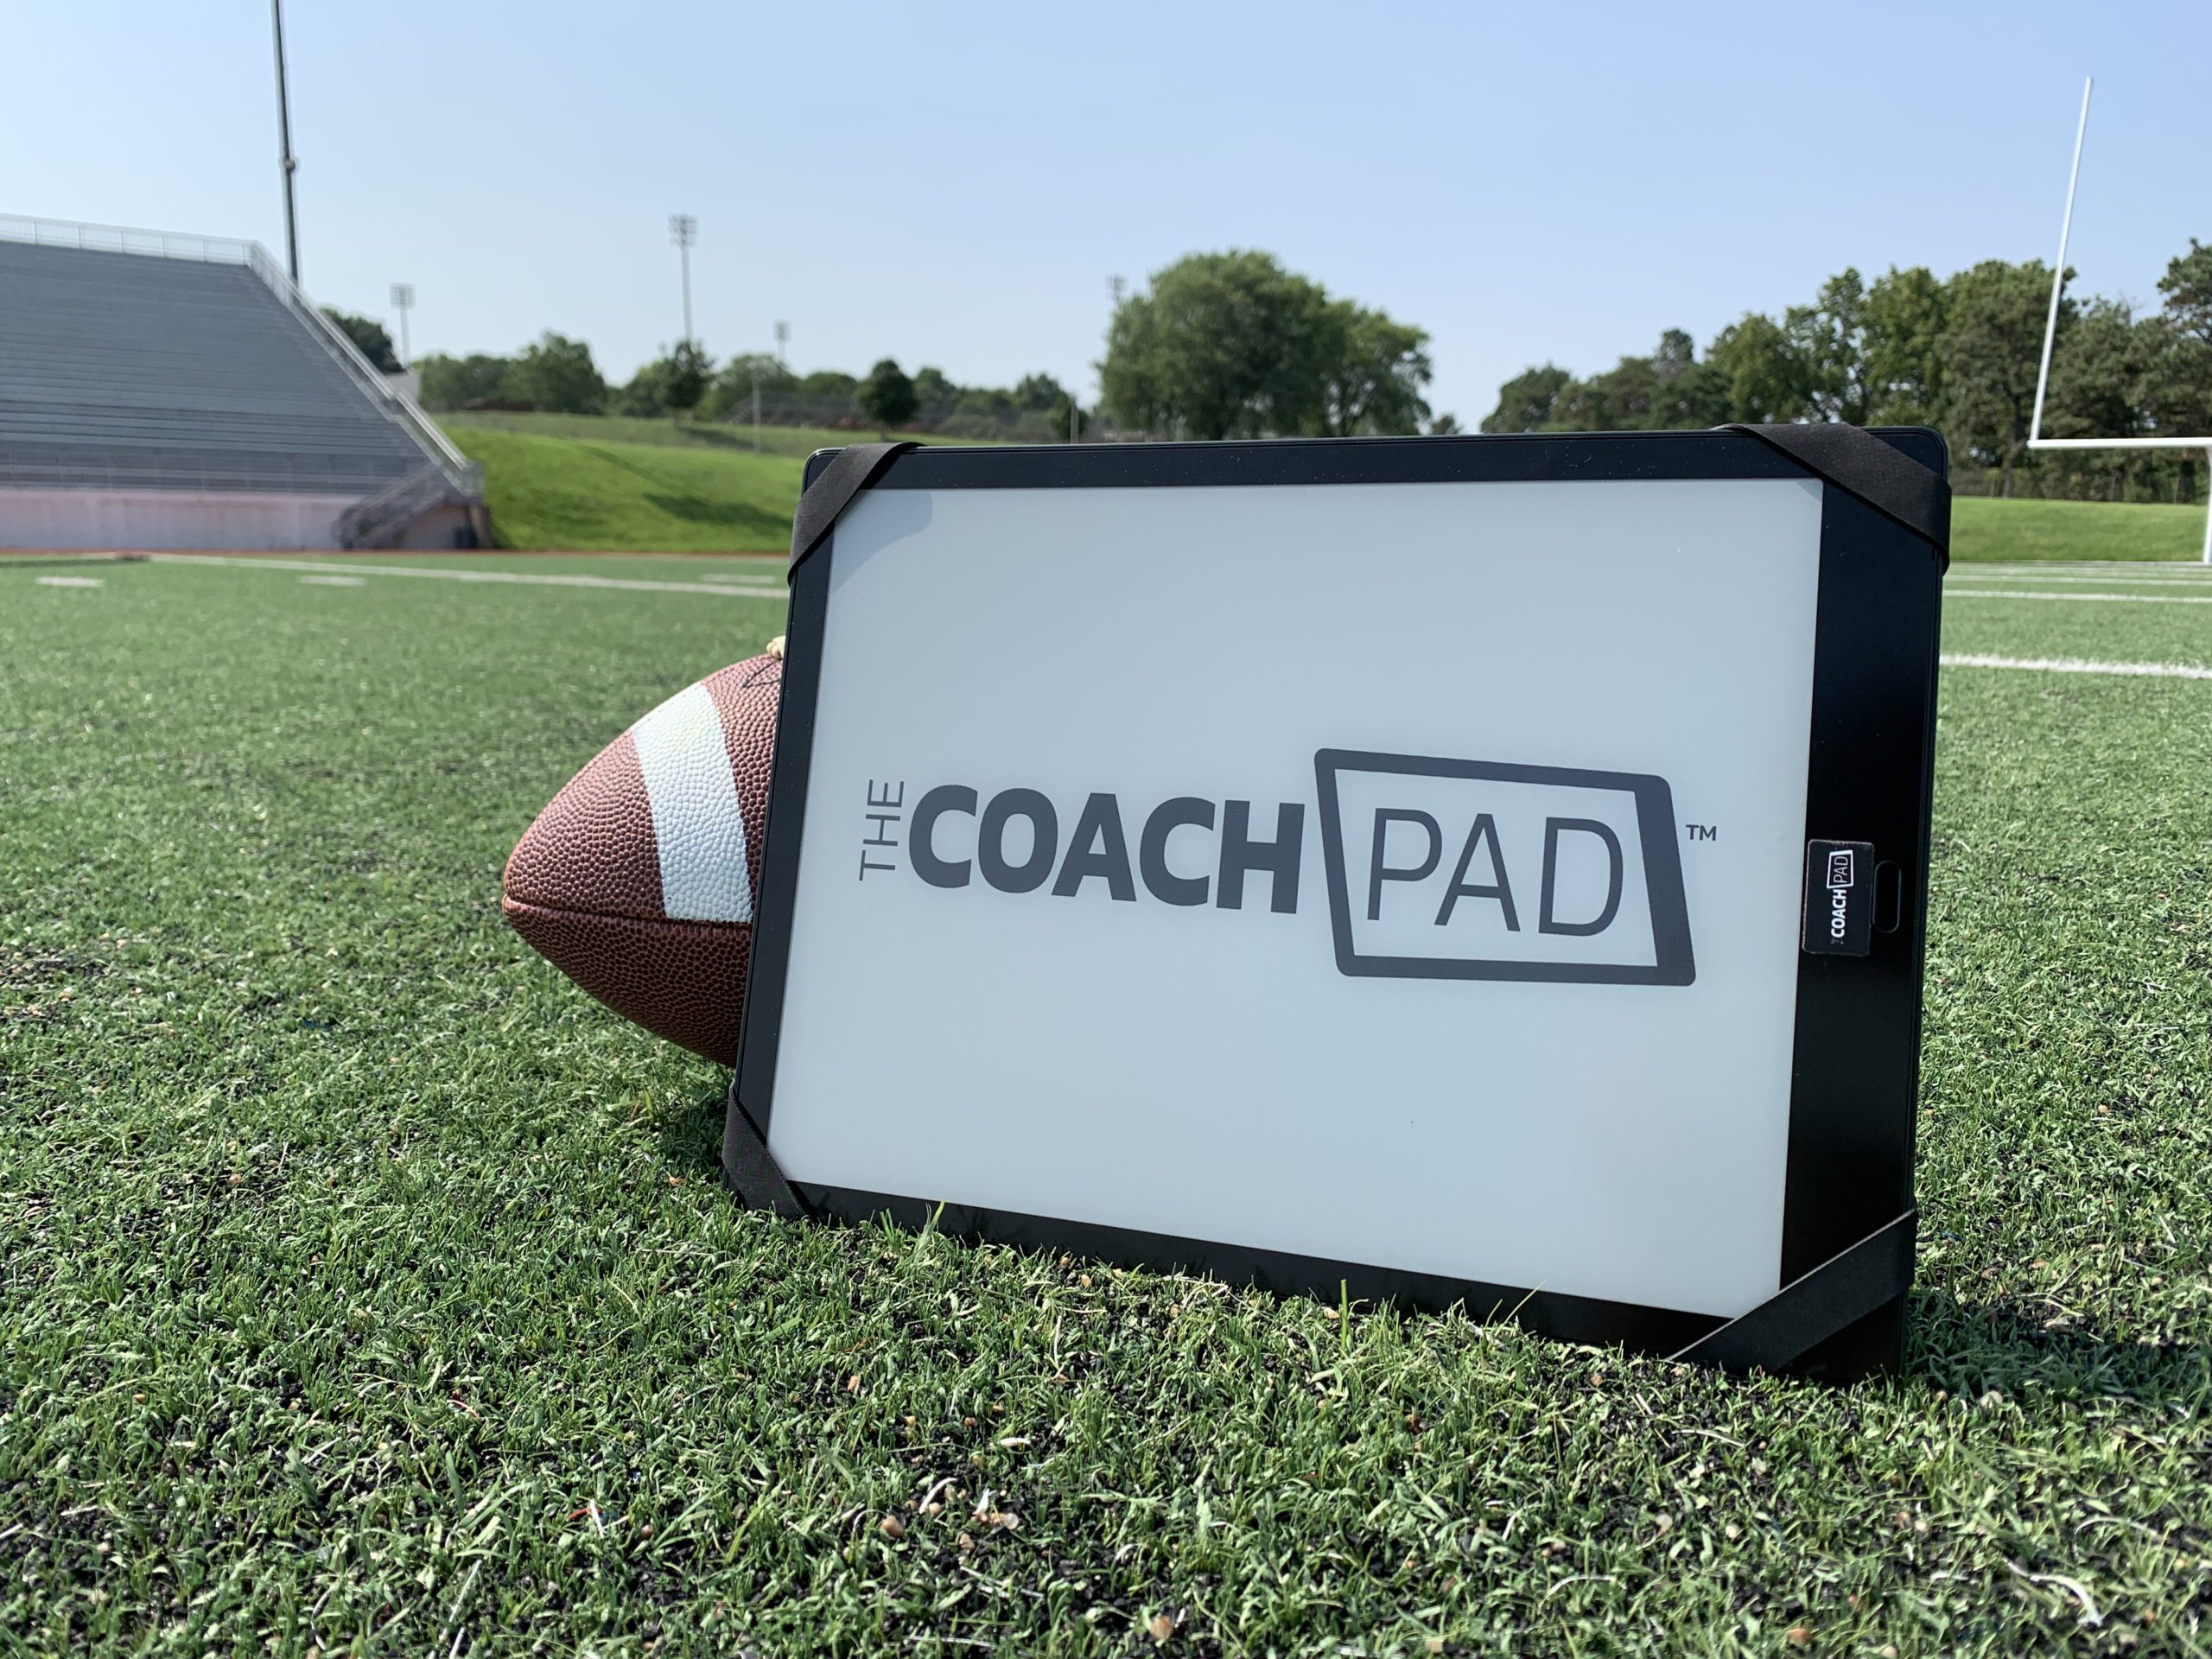 Scout Cards from Hudl Practice Scripts or other programs can be used on The Coachpad